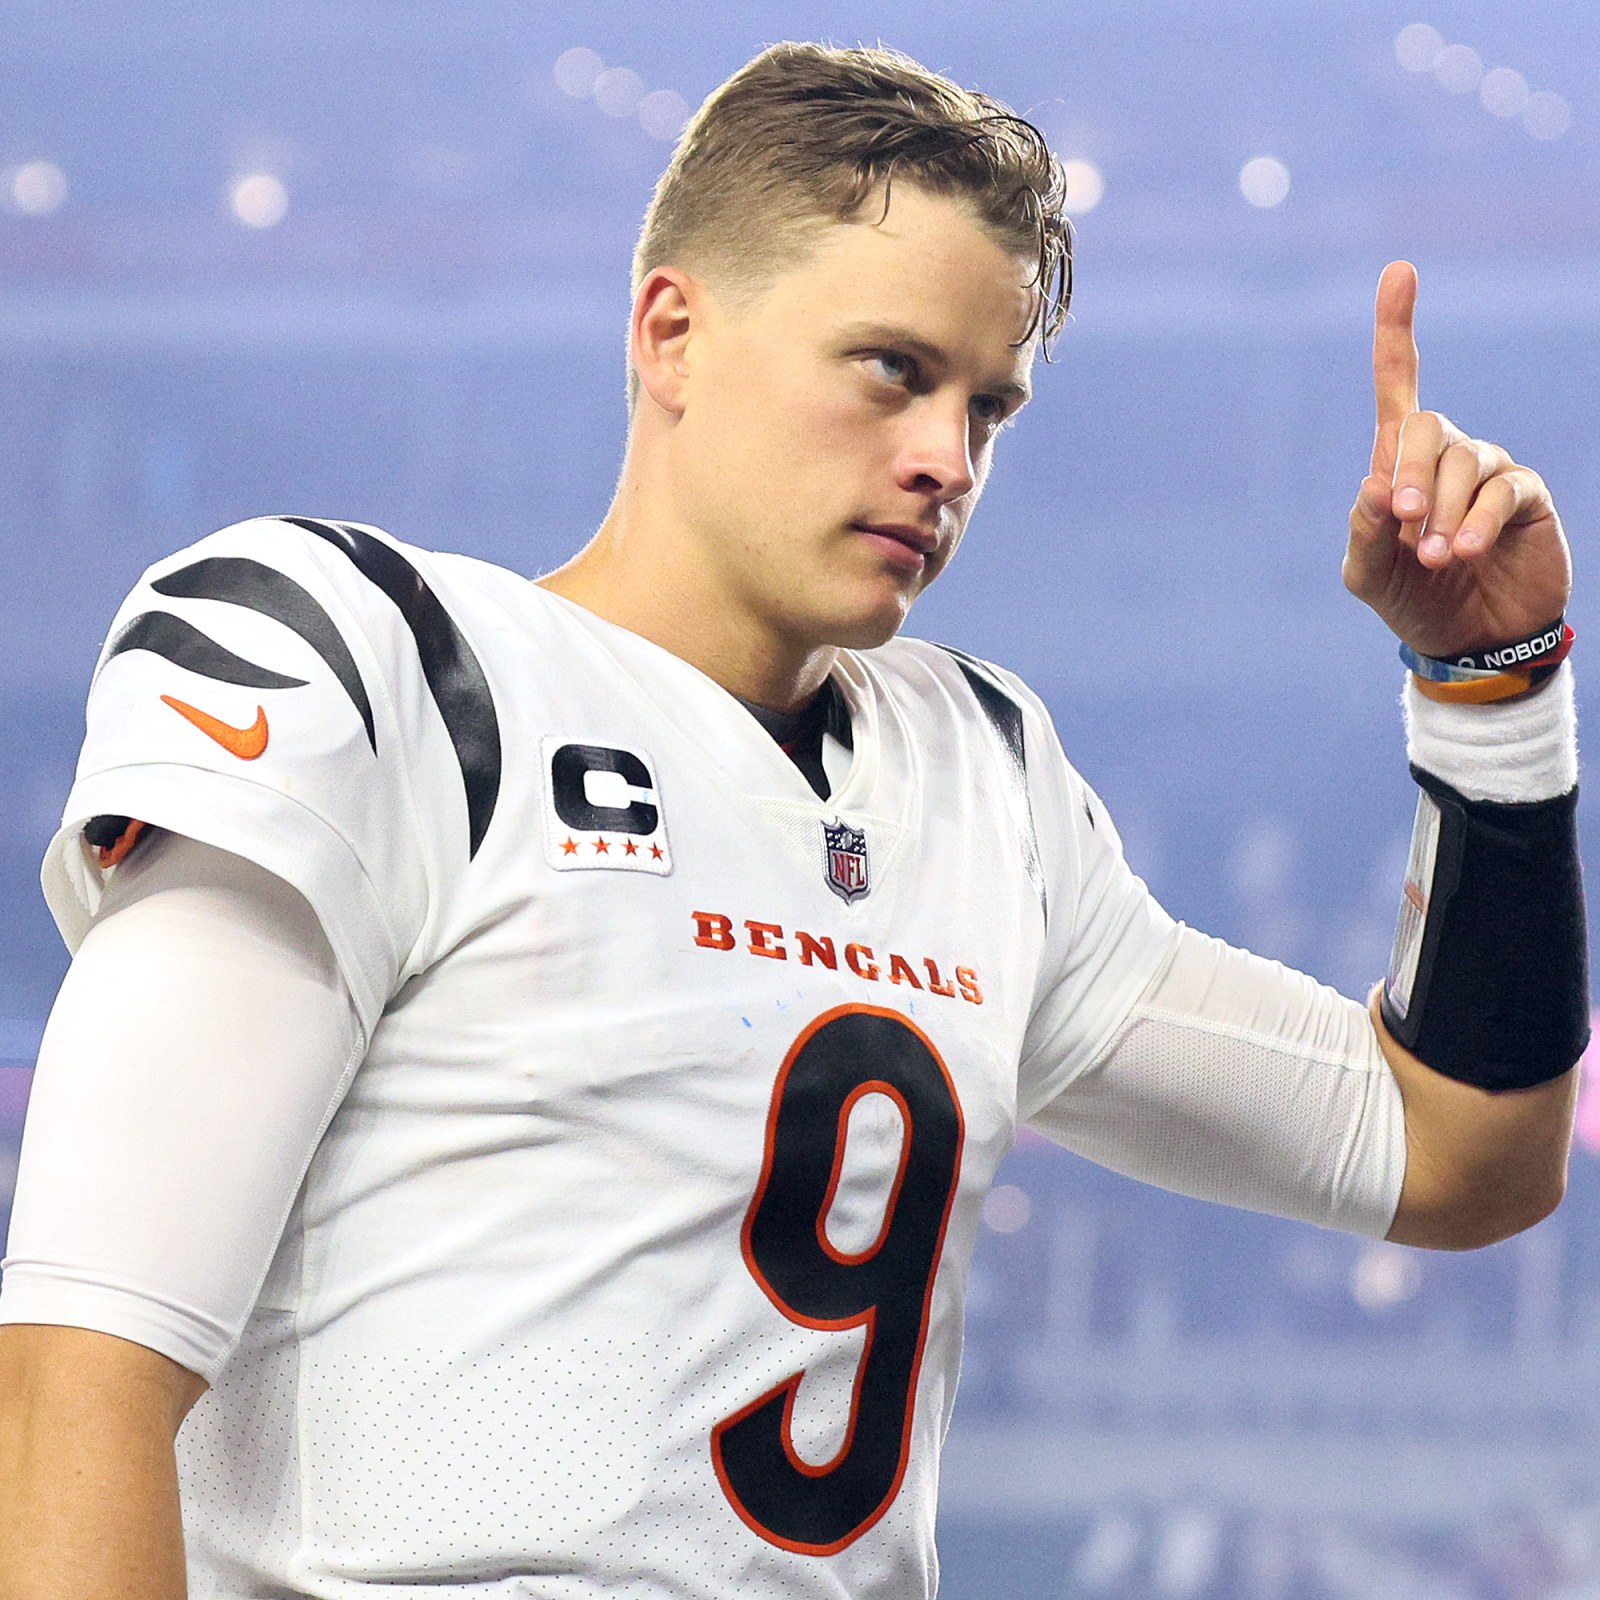 Joe Burrow on best QB: I don't think there's any argument, it's